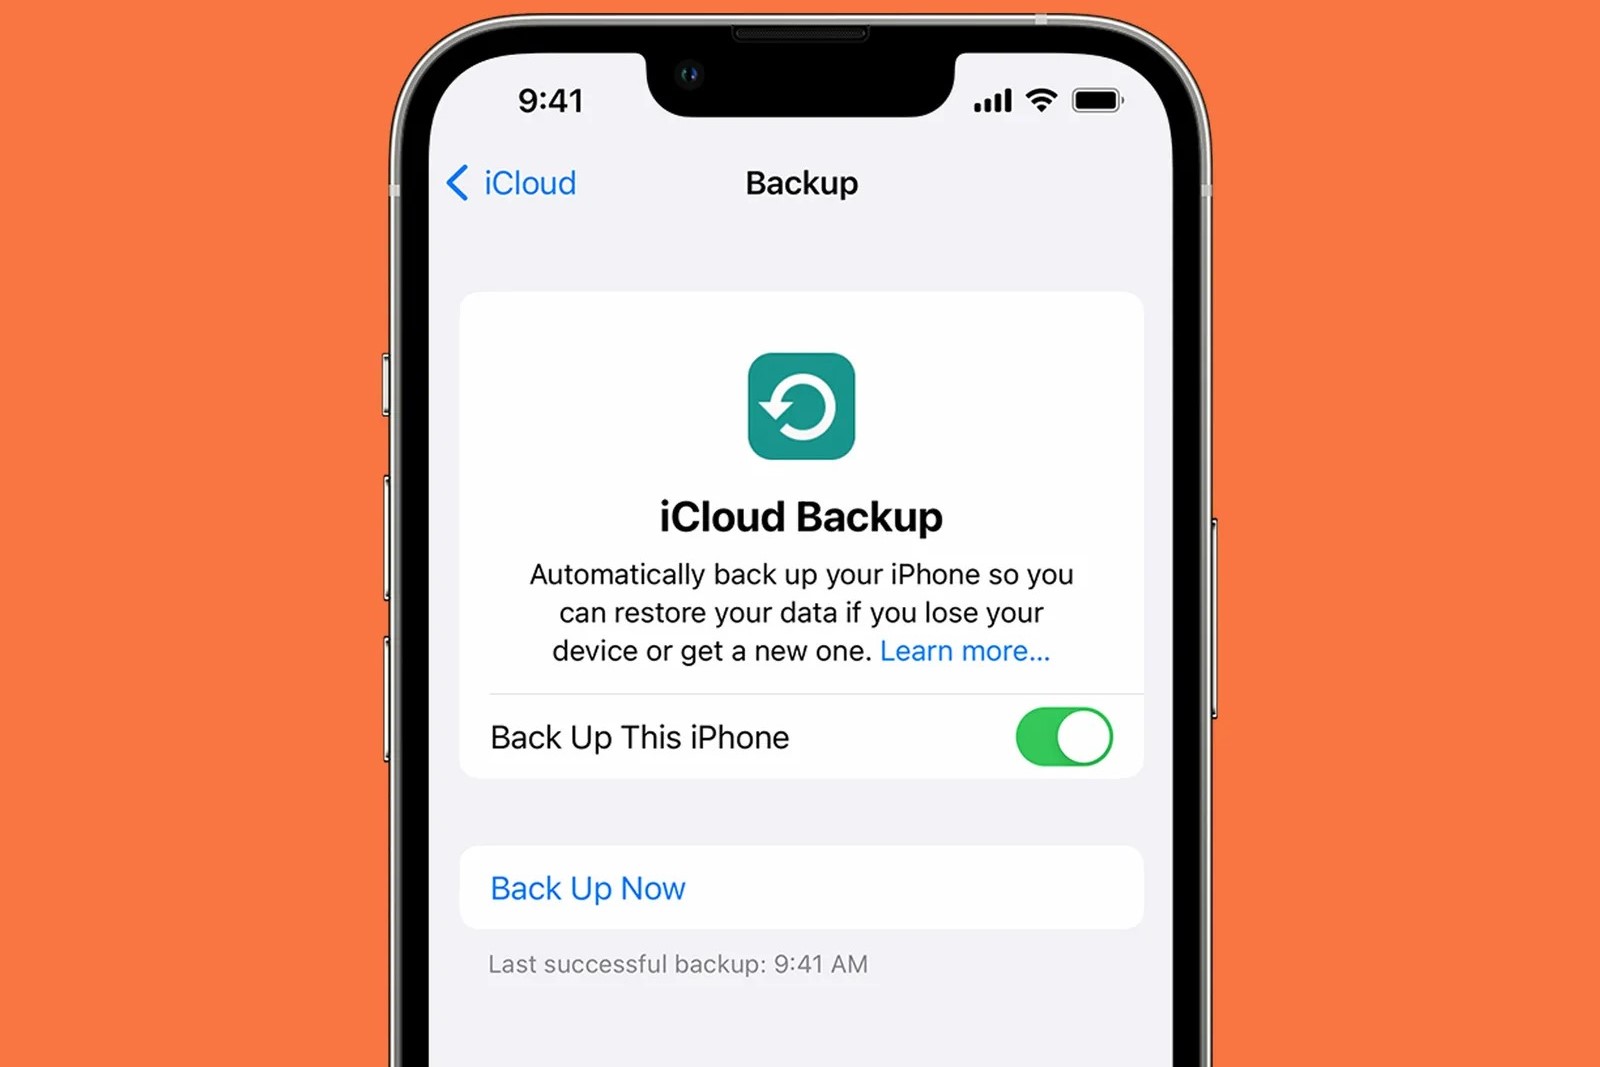 backing-up-sim-card-data-on-iphone-step-by-step-guide